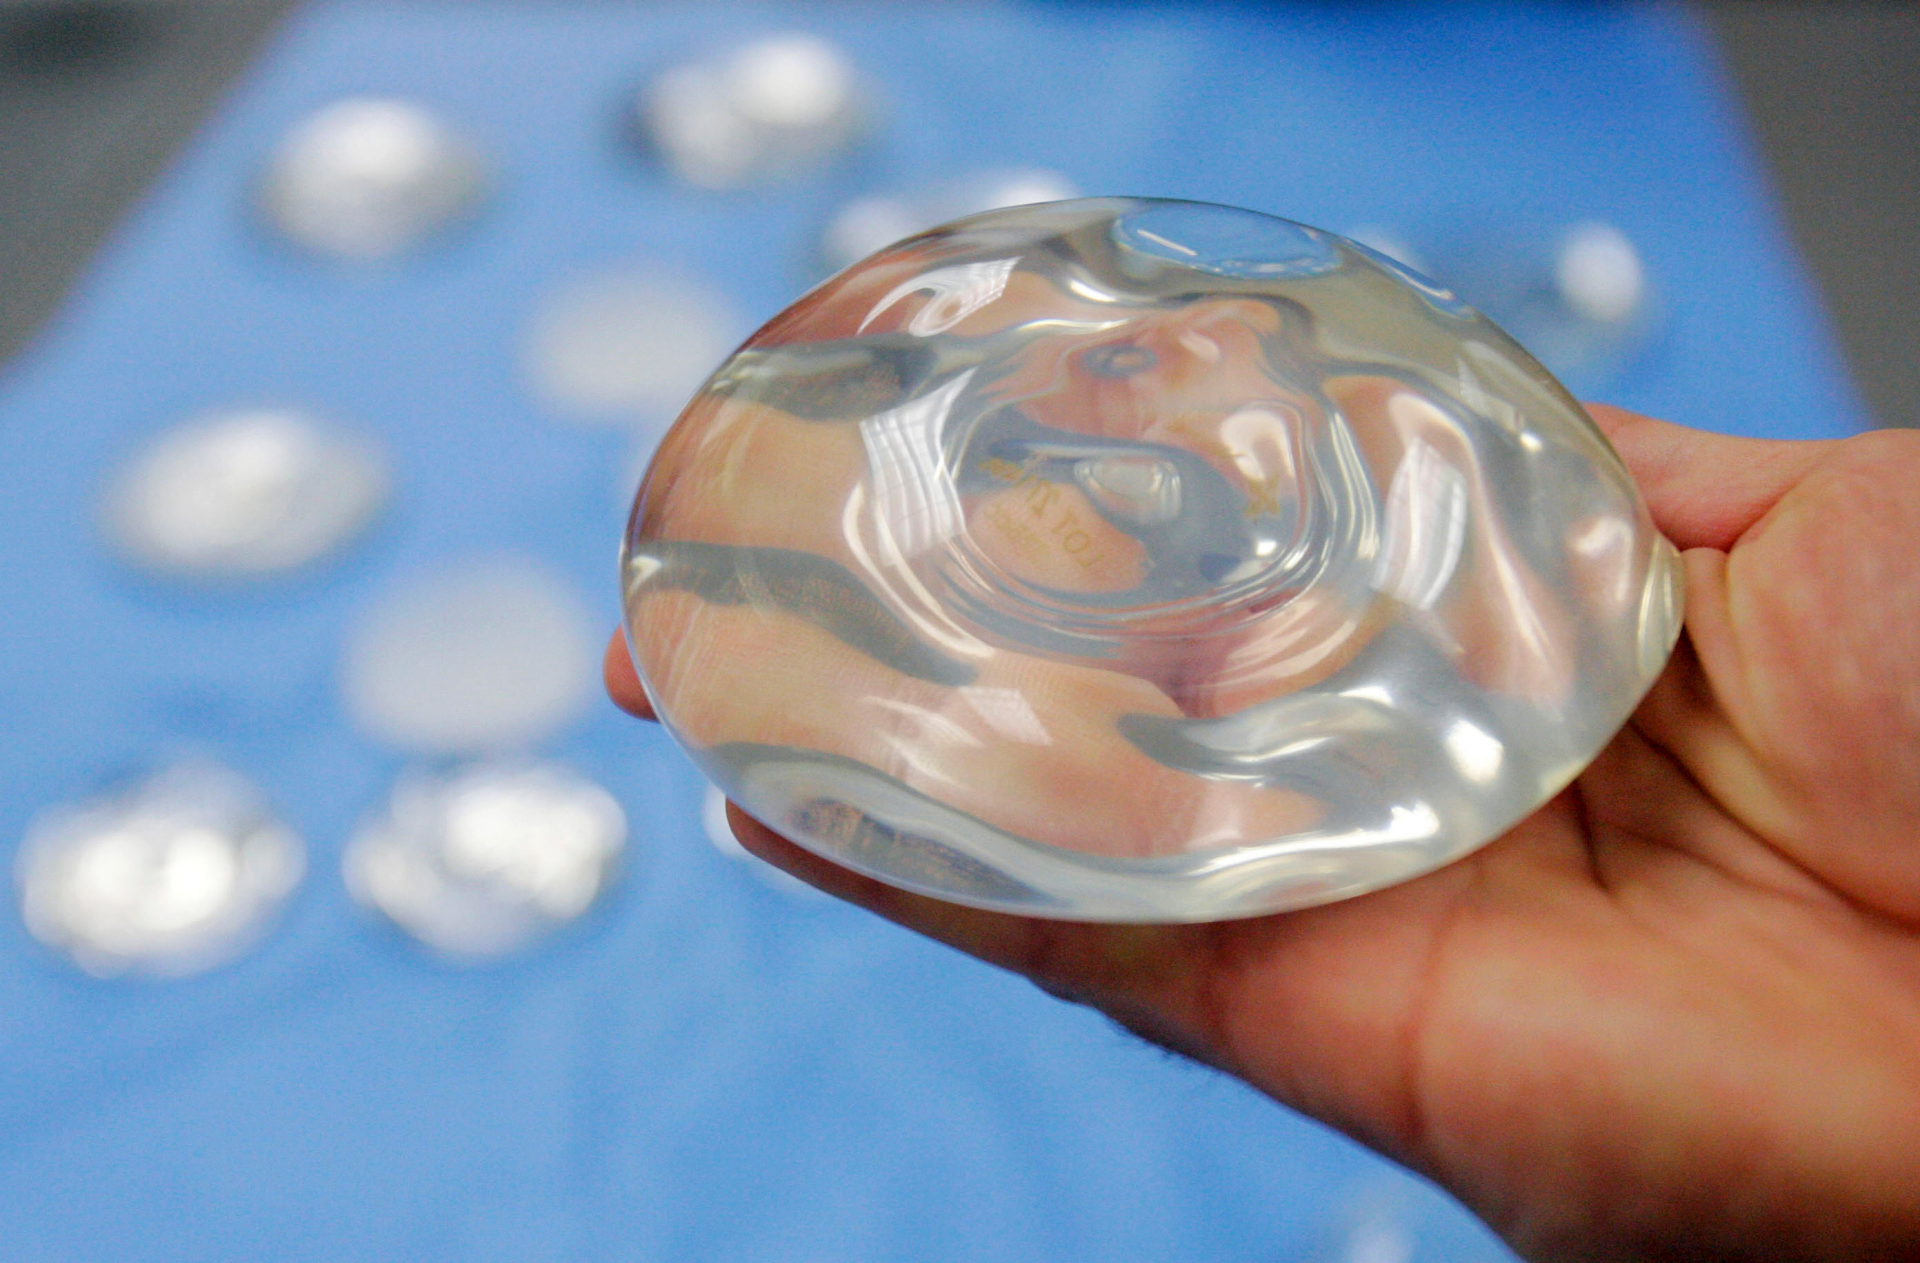 Breast implants deflected bullet, saved woman’s life